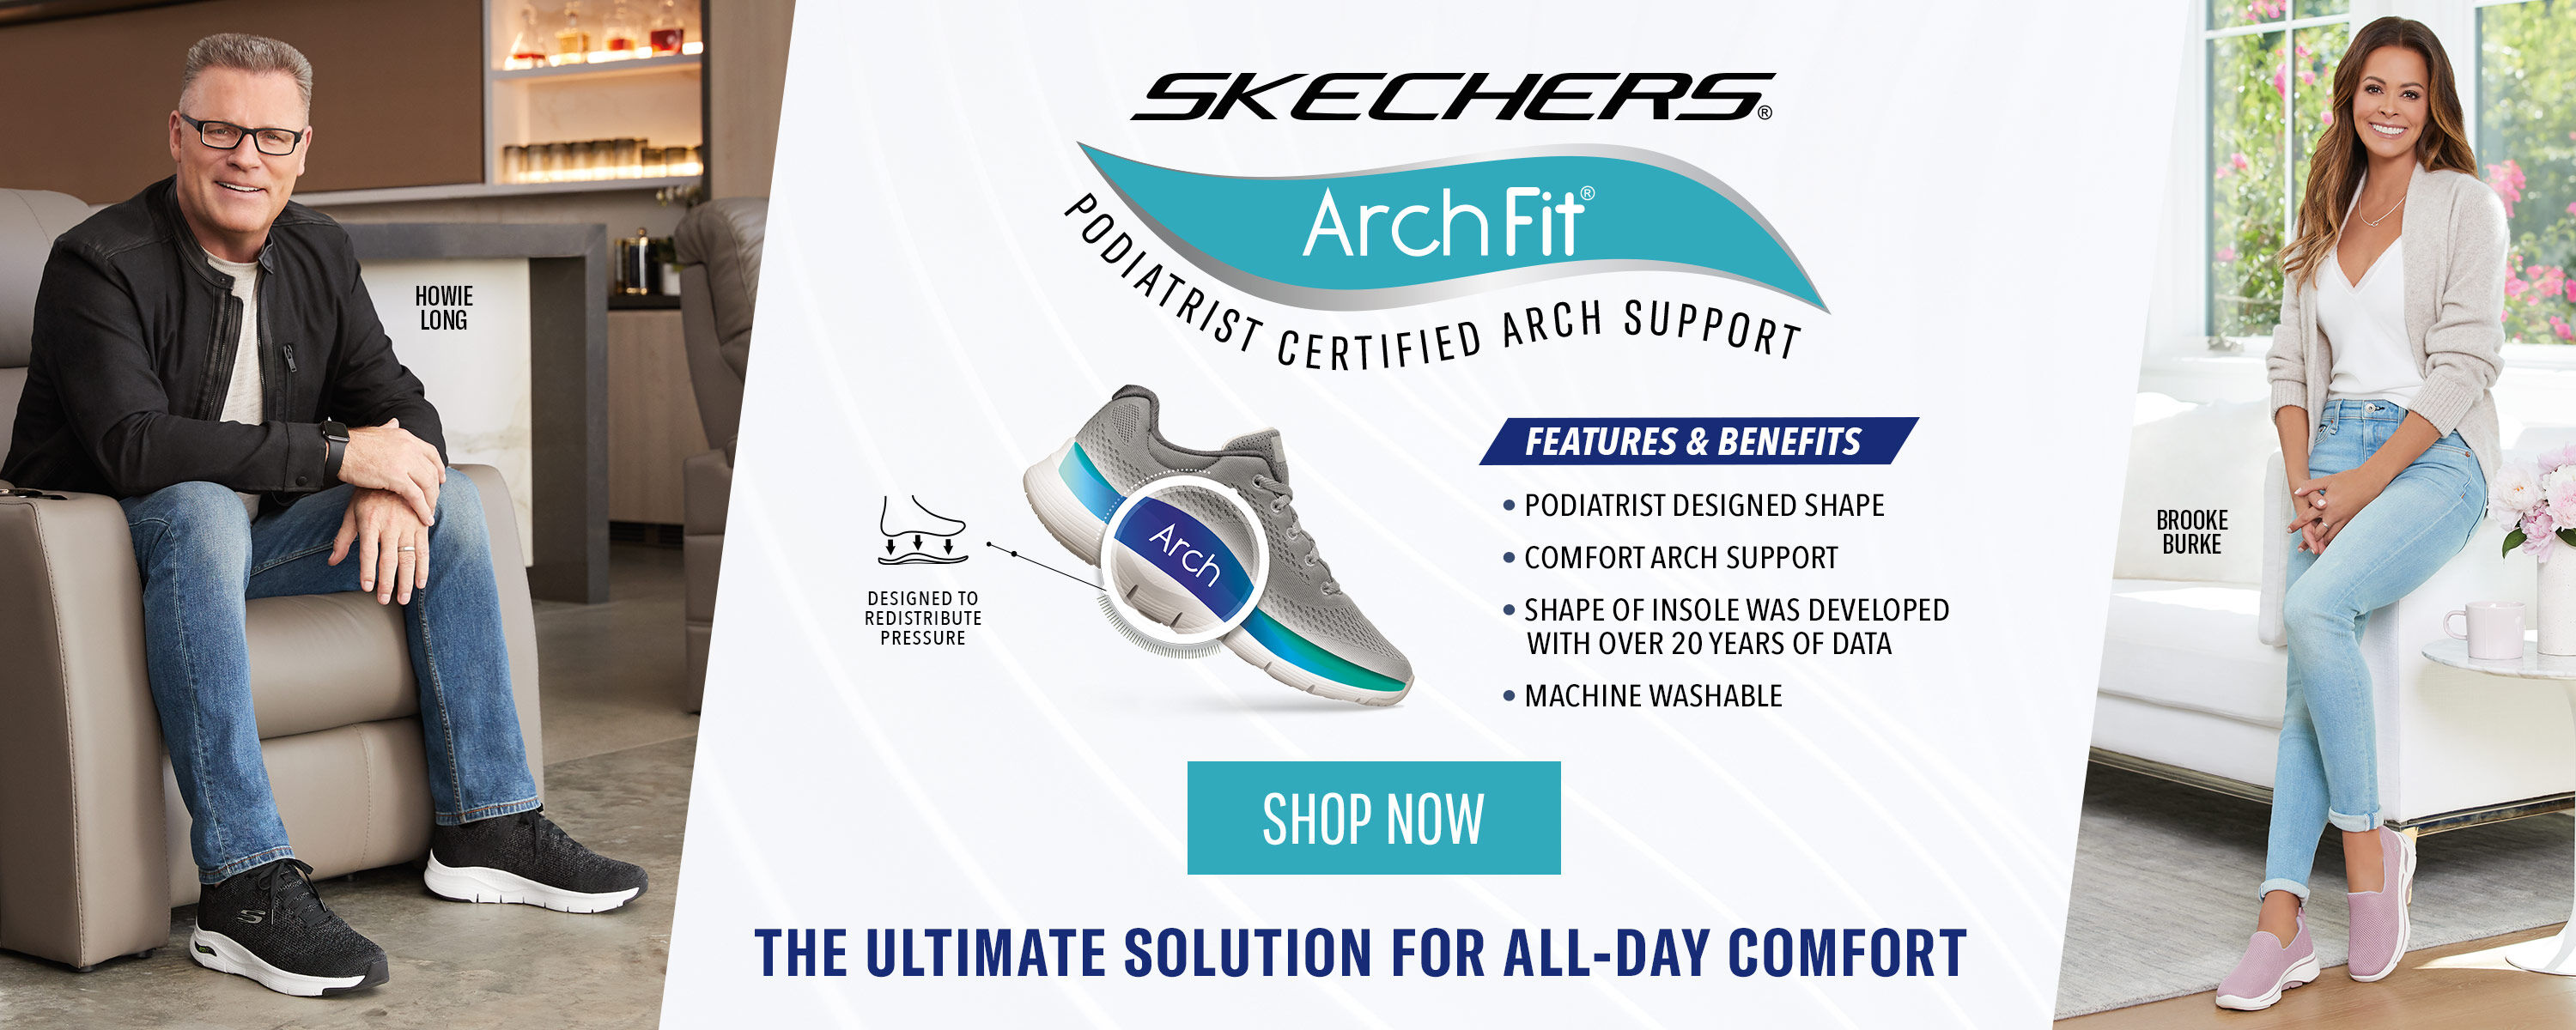 skechers shoes outlet near me